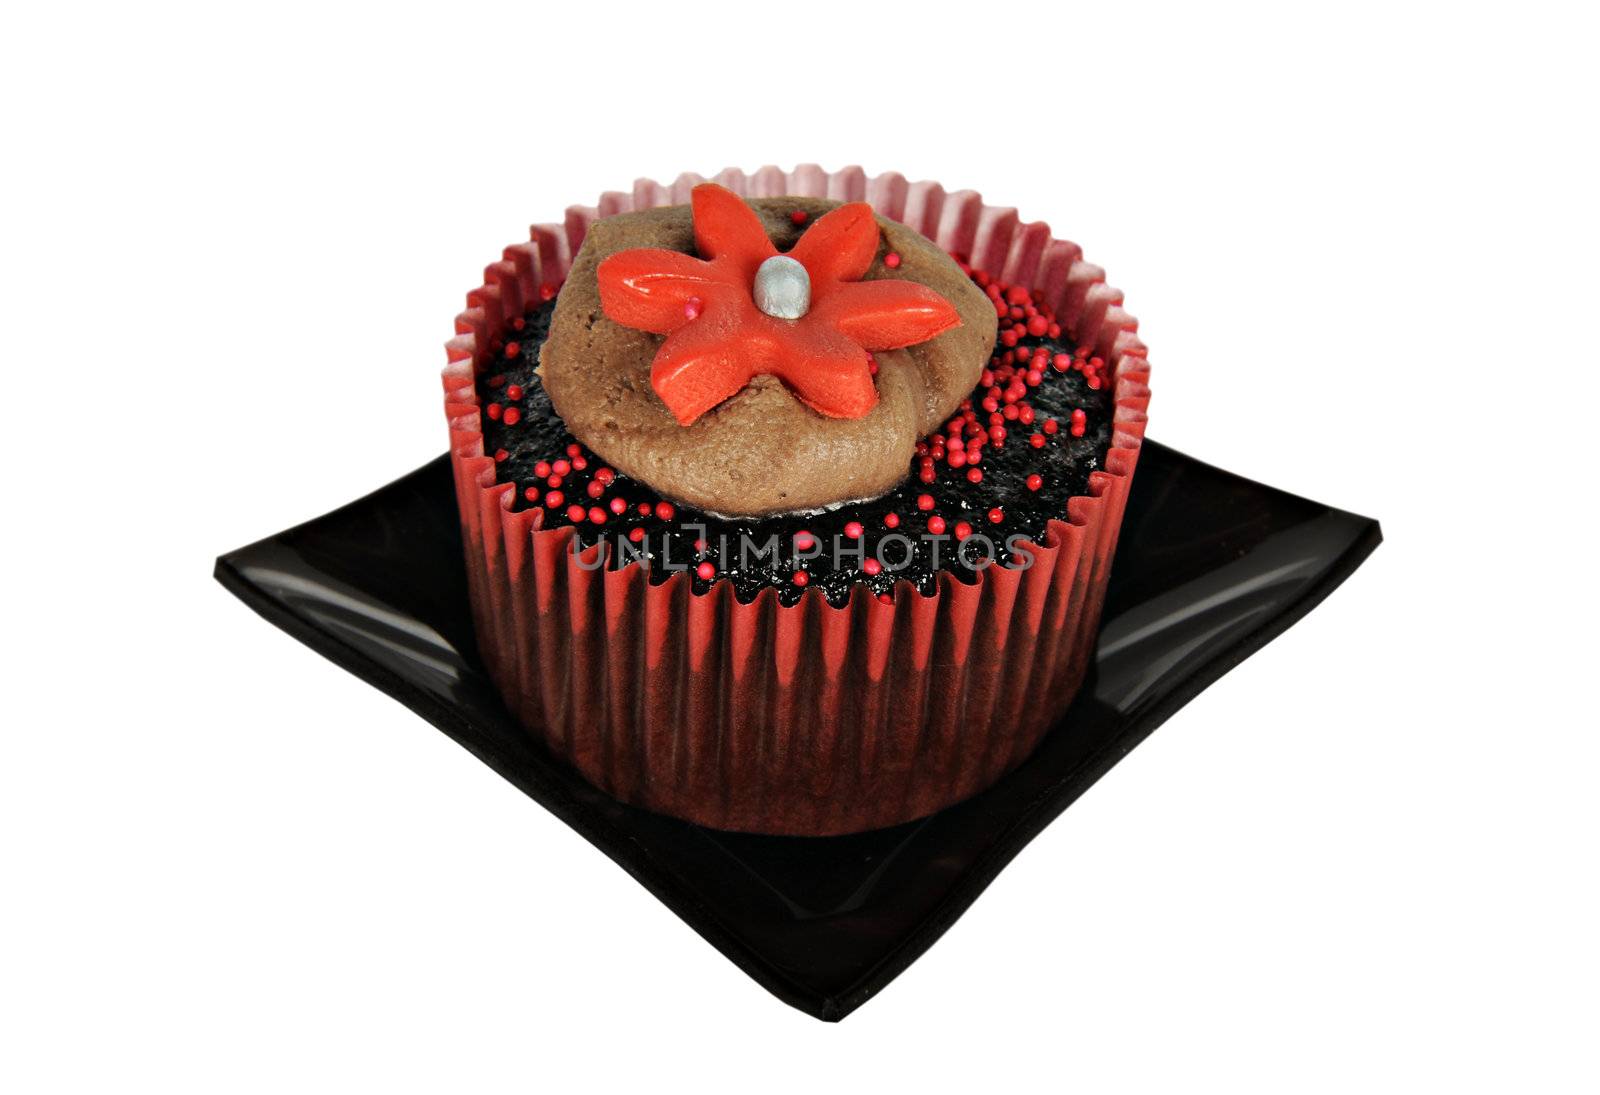 One chocolatecupcake with red icing on a black plate on pure white background